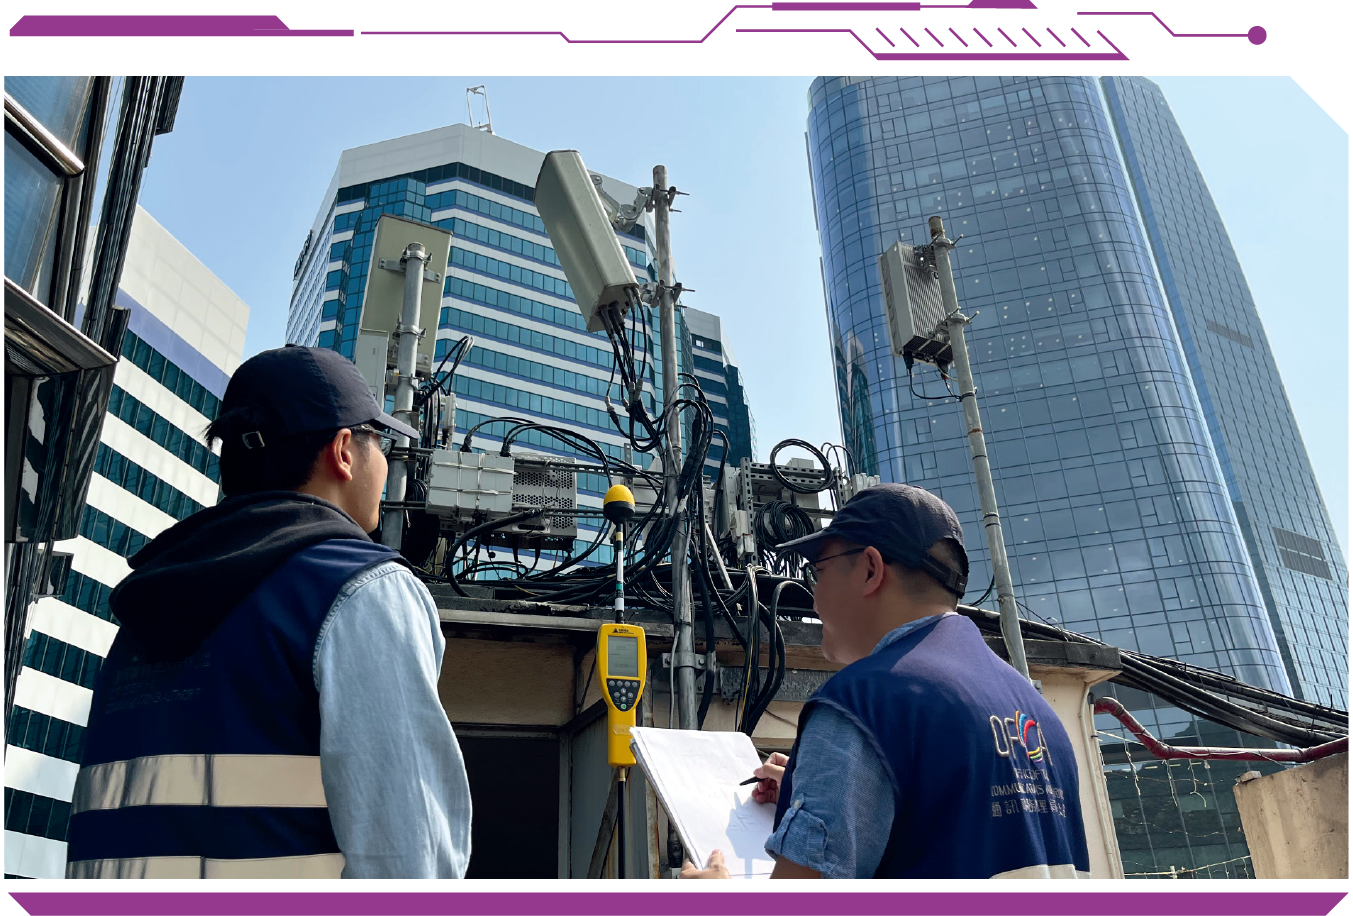 OFCA conducts sample checks on the radiation levels of approved radio base stations from time to time to safeguard public health.